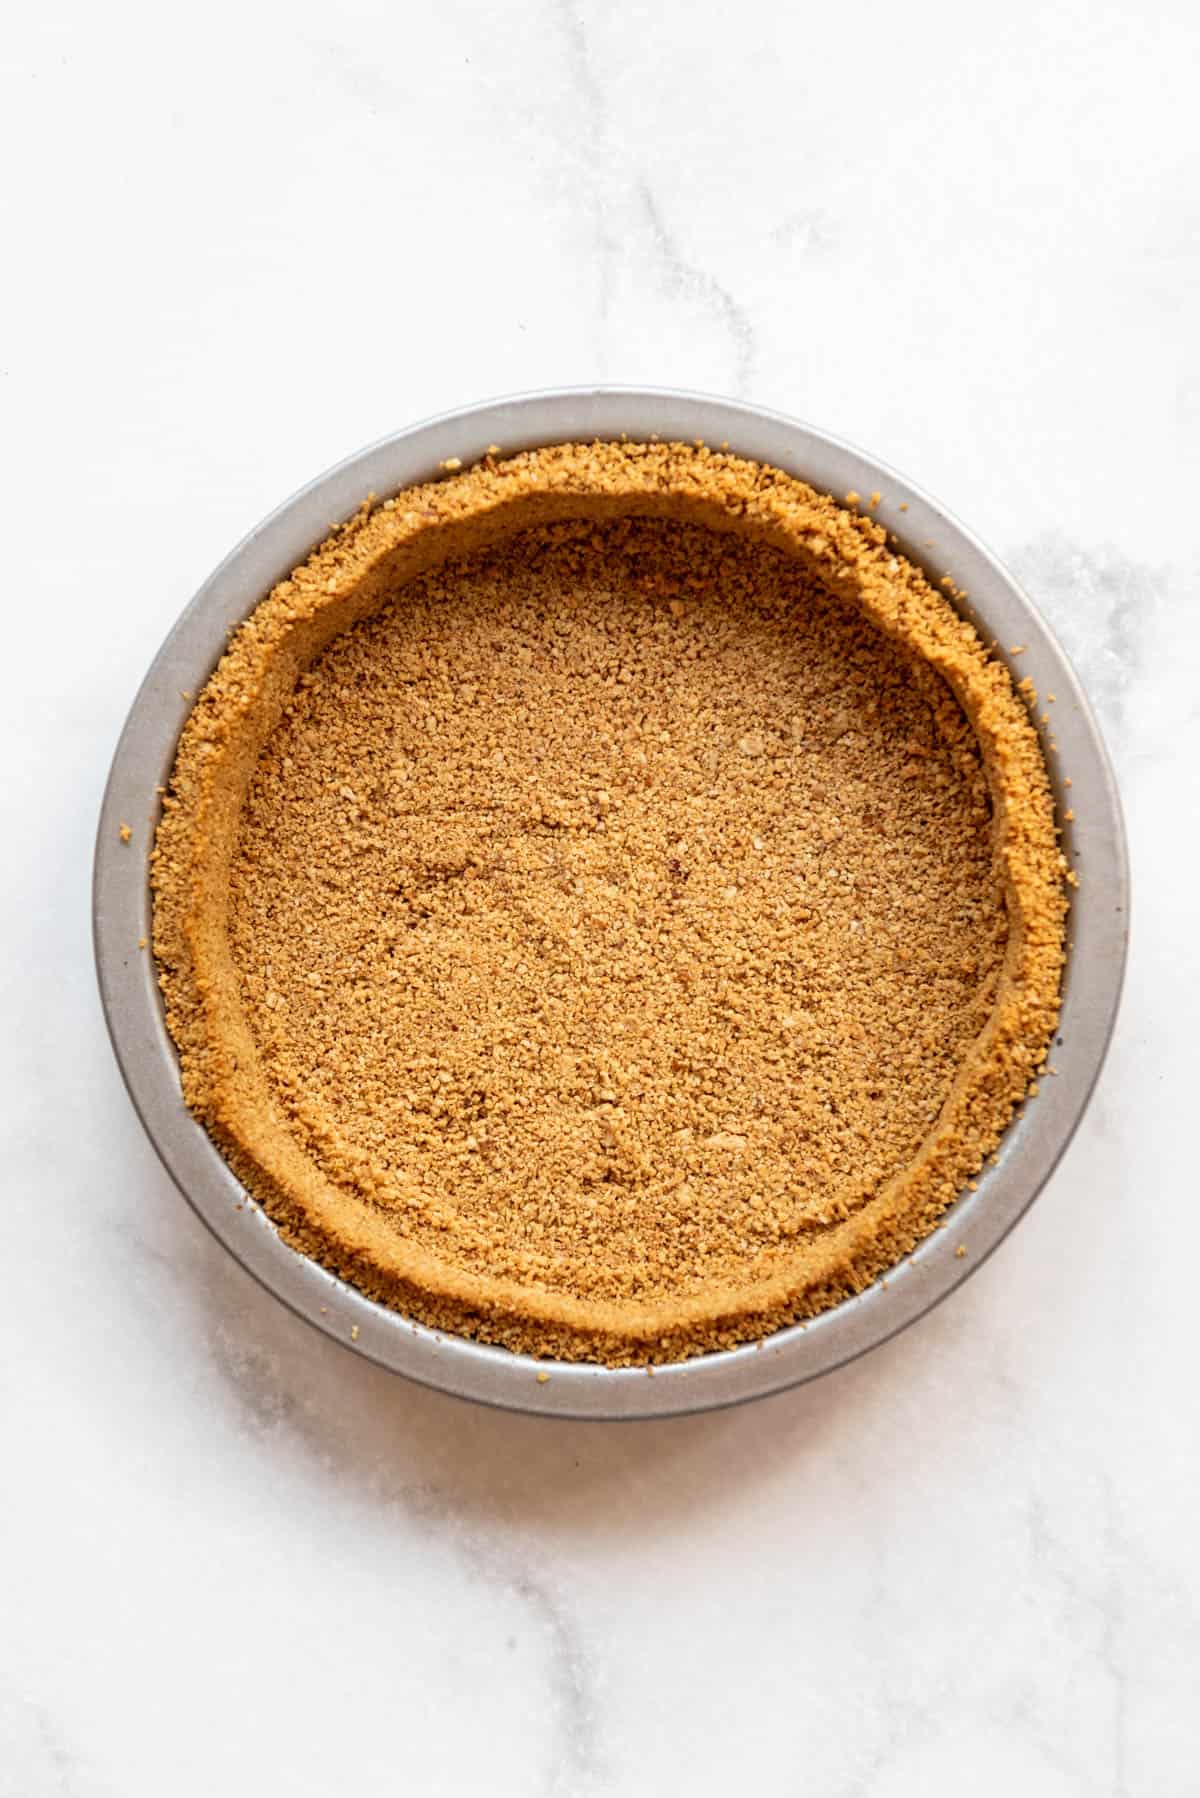 A baked graham cracker and pecan pie crust.